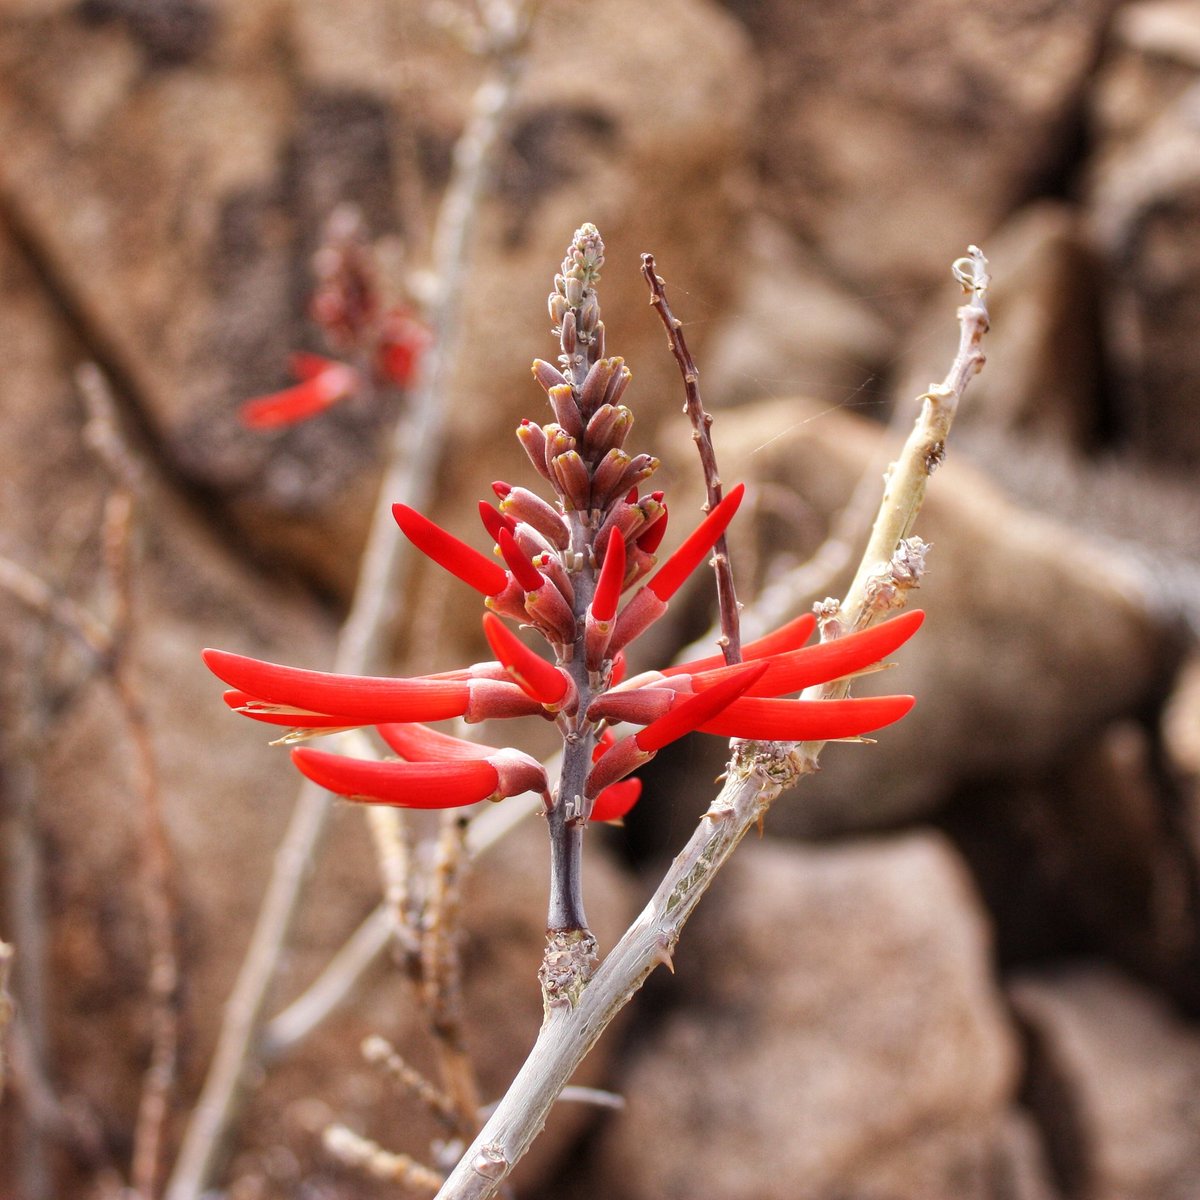 Western Coral Bean (Erythrina flabelliformis)

#flora #plants #flower #red #wildflowers #bean #coralbean #westerncoralbean #coral #erythrina #erythrinaflabelliformis #legumefamily #fabaceae #chilicote #coraltree